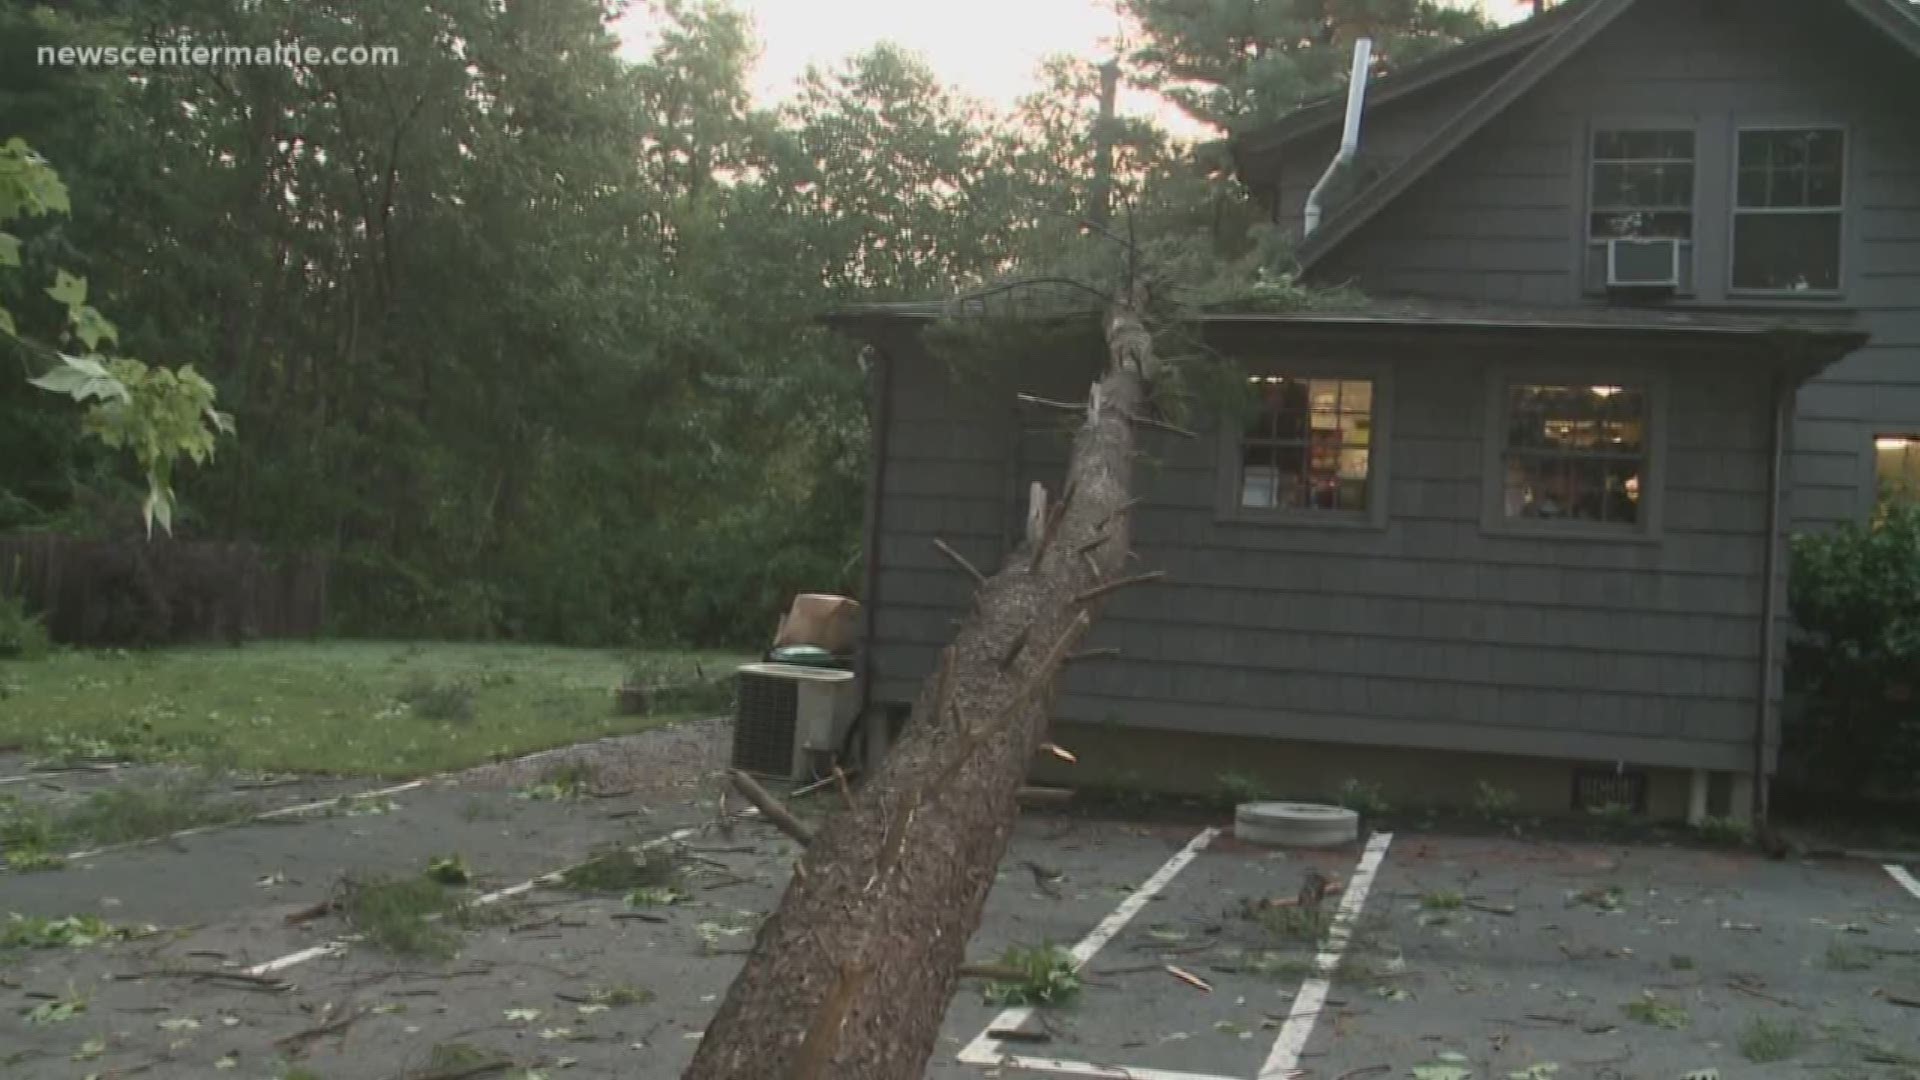 York residents are working on clean-up after the National Weather Service confirmed a 'downburst' struck the area Wednesday afternoon.